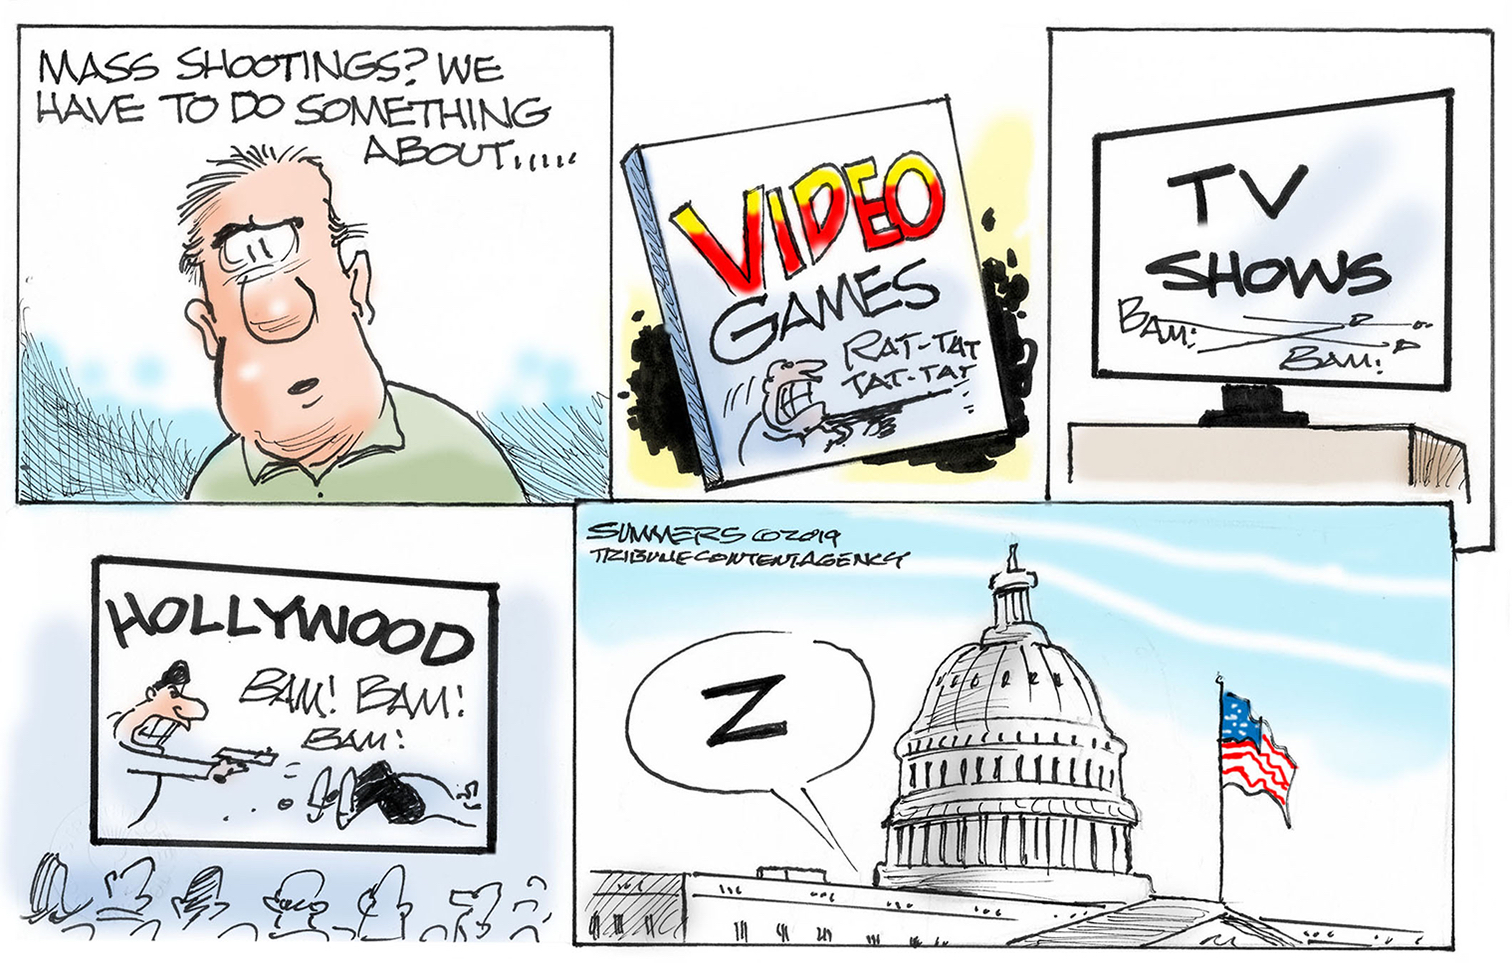 Political Cartoon . Mass Shootings Violent Video Games TV Shows Movies  Congressional Inaction